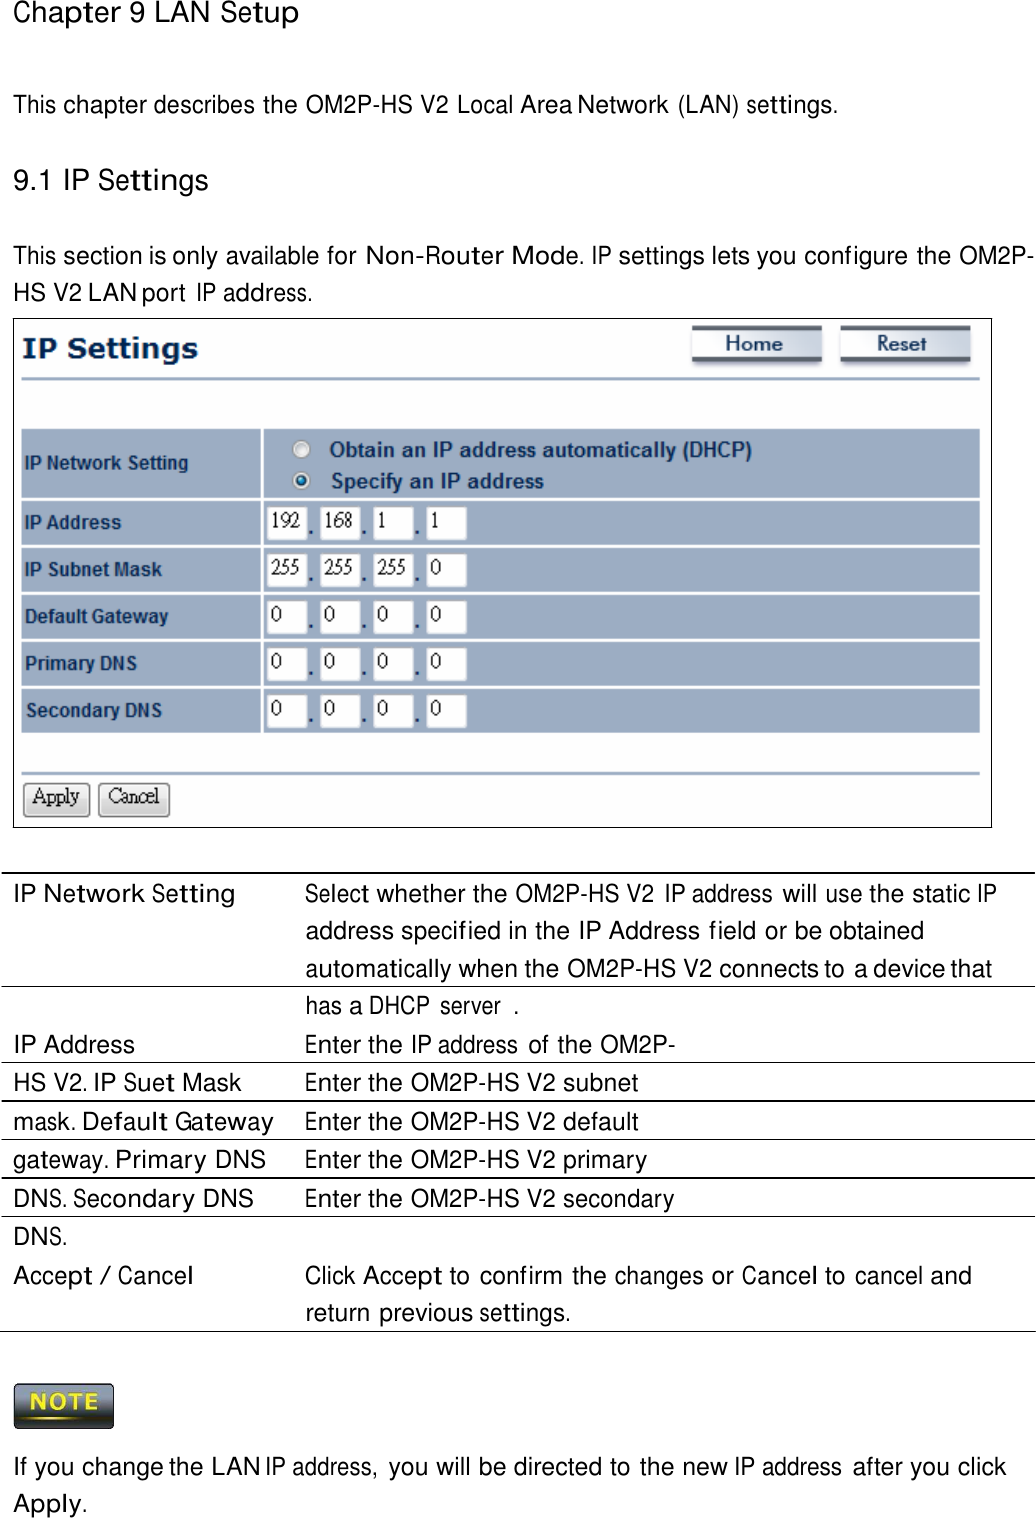 Chapter 9 LAN Setup     This chapter describes the OM2P-HS V2 Local Area Network (LAN) settings.   9.1 IP Settings   This section is only available for Non-Router Mode. IP settings lets you configure the OM2P-HS V2 LAN port IP address.                            IP Network Setting Select whether the OM2P-HS V2  IP address will use the static IP address specif ied in the IP Address field or be obtained automatically when the OM2P-HS V2 connects to a device that has a DHCP  server  . IP Address  Enter the IP address of the OM2P-HS V2. IP Suet Mask  Enter the OM2P-HS V2 subnet mask. Default Gateway Enter the OM2P-HS V2 default gateway. Primary DNS  Enter the OM2P-HS V2 primary DNS. Secondary DNS  Enter the OM2P-HS V2 secondary DNS. Accept / Cancel Click Accept to confirm the changes or Cancel to cancel and return previous settings.      If you change the LAN IP address, you will be directed to the new IP address after you click Apply. 